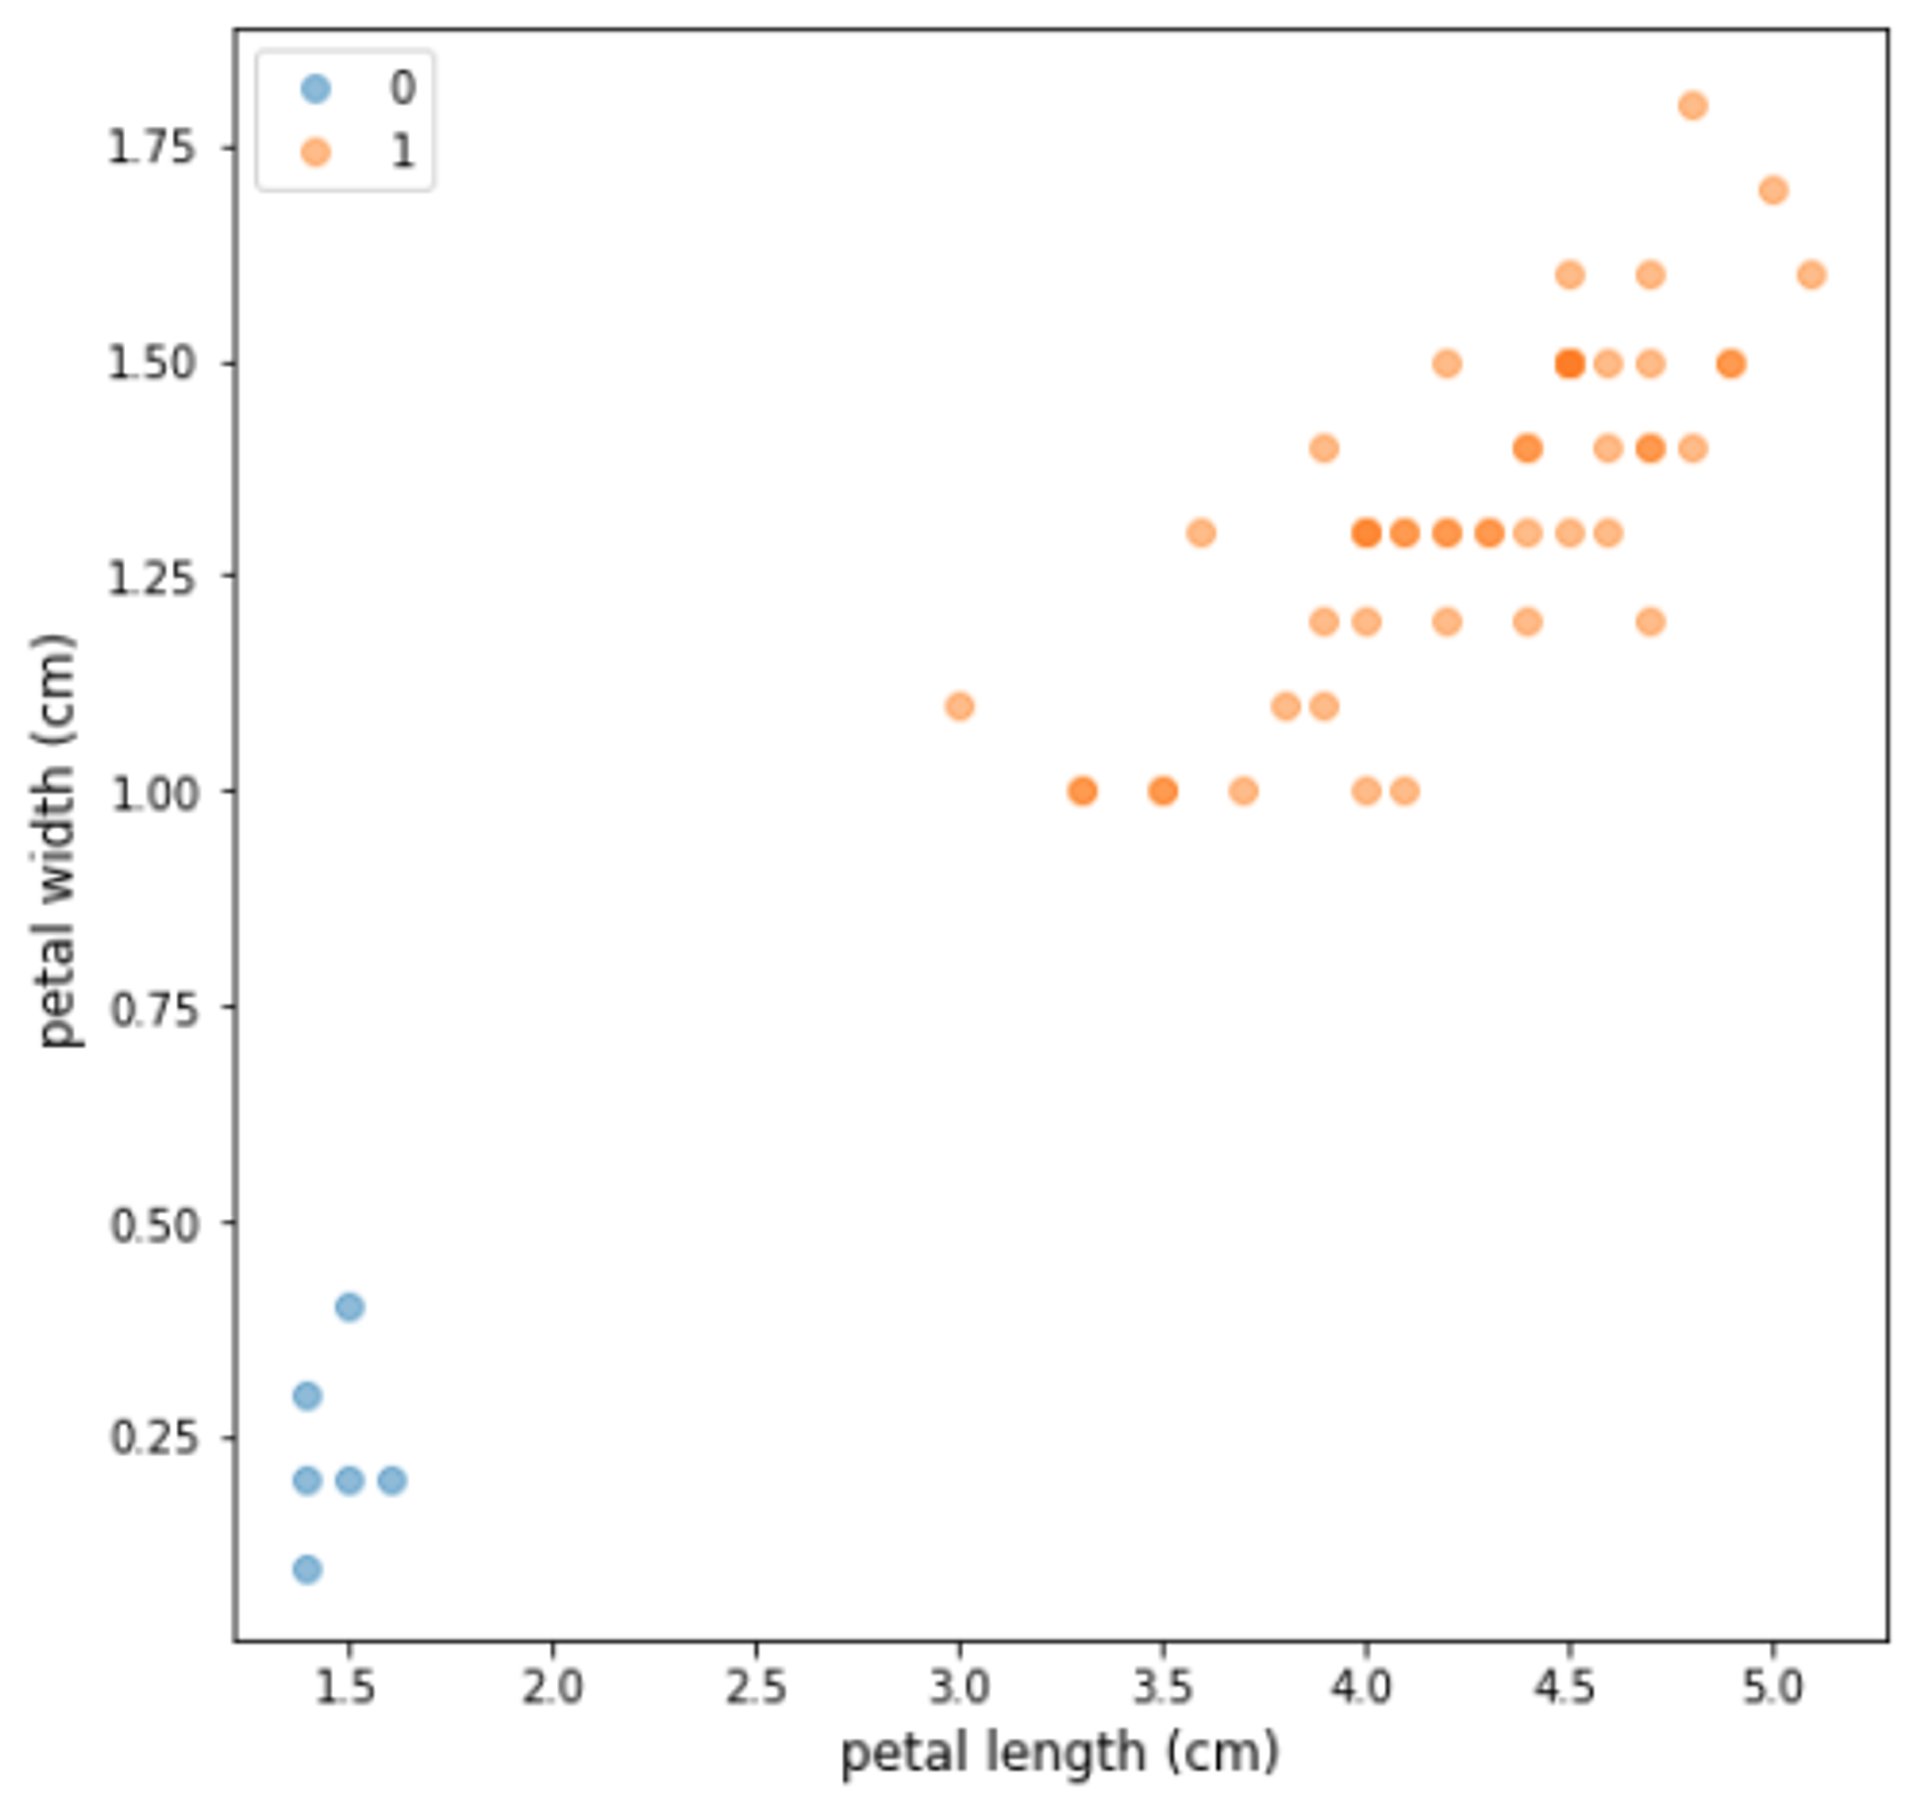 a scatter plot of 2 classes from Fisher's Iris - class zero shows only 6 observations, while class one shows over 40 observations